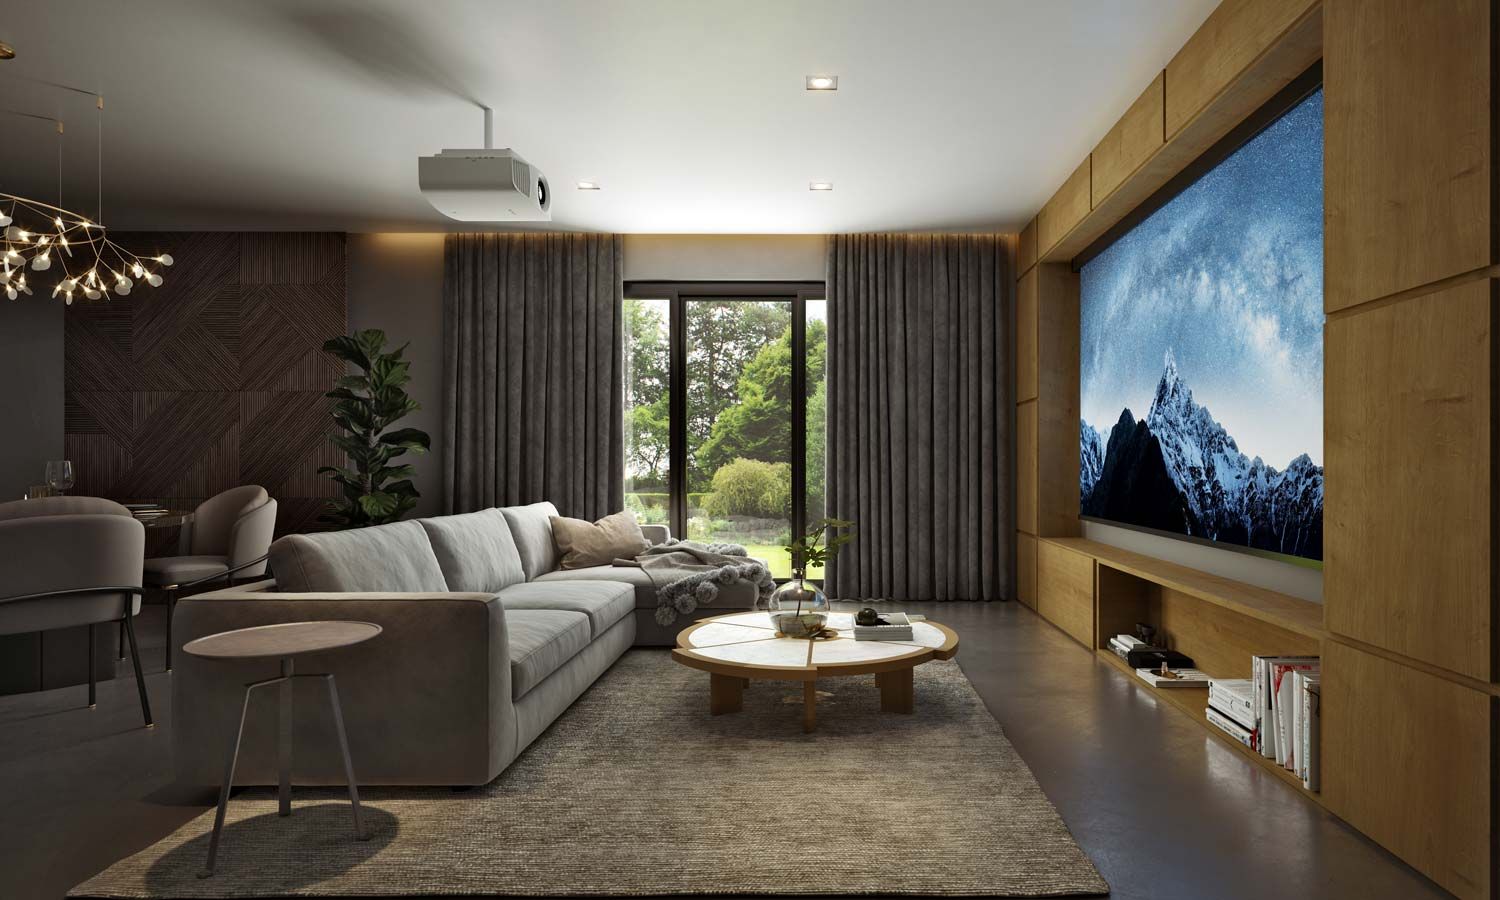 sony technology in a media room with modern design and curtains